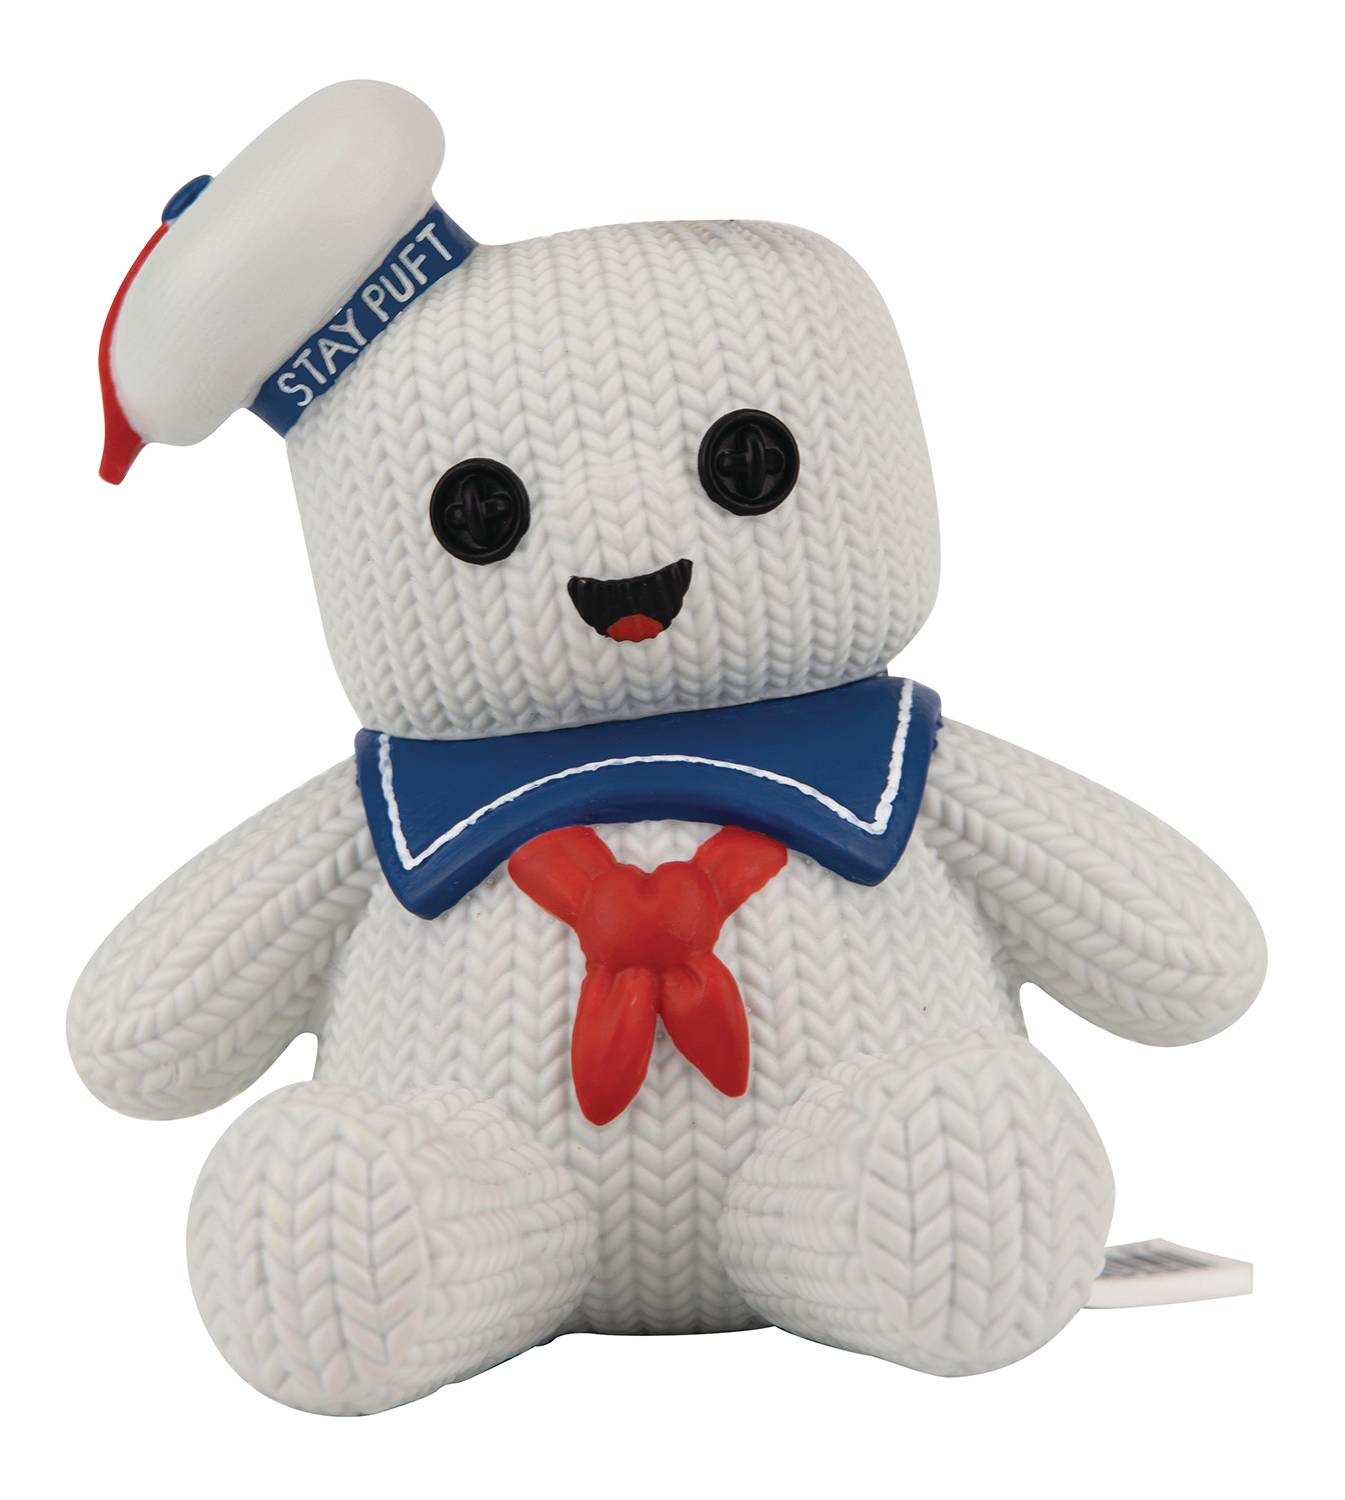 GHOSTBUSTERS HANDMADE BY ROBOTS STAY PUFT VINYL FIG (C: 1-1-